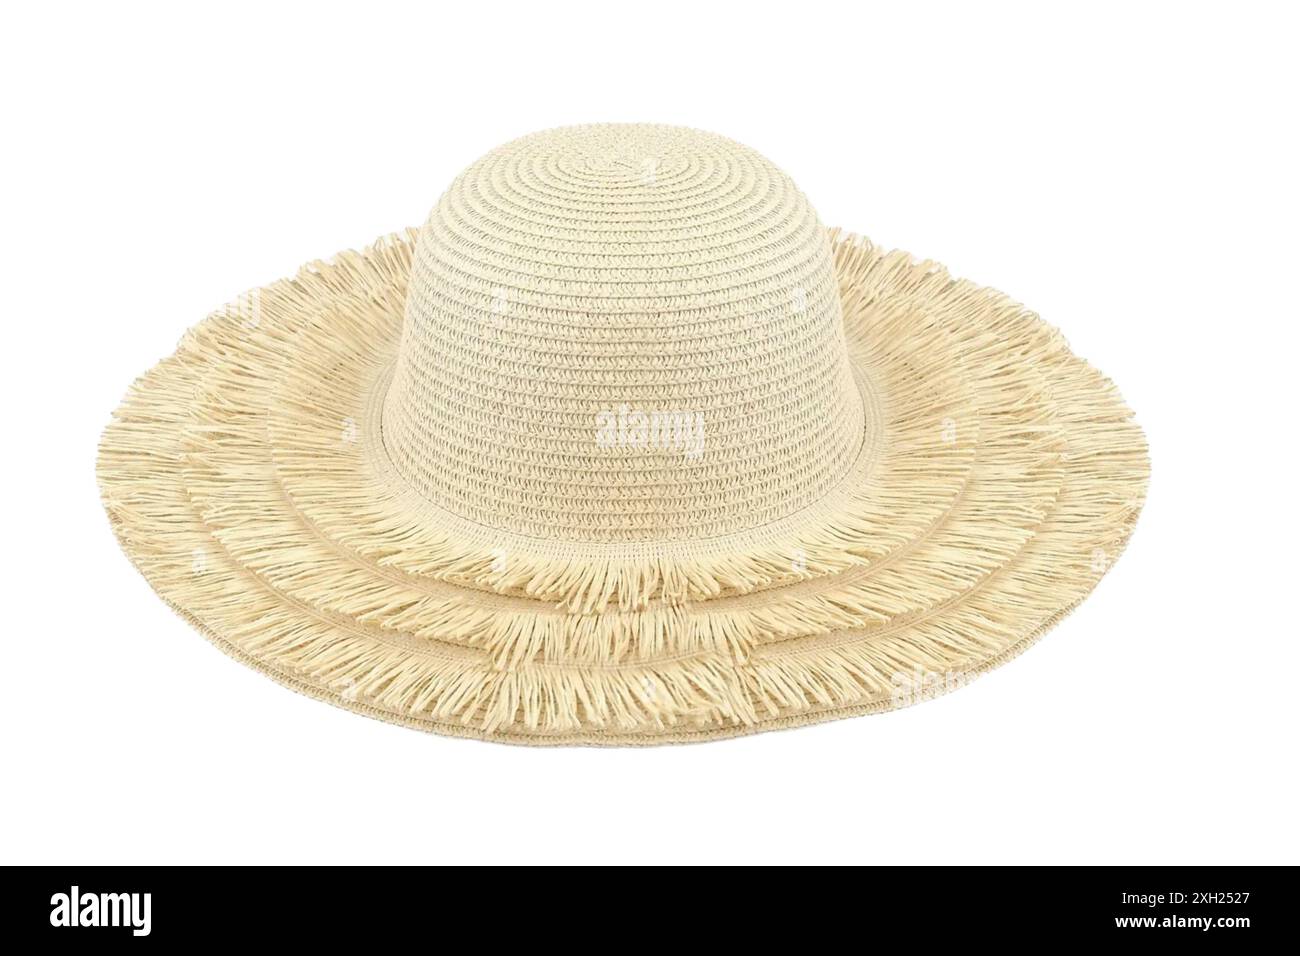 Natural Straw Hat with Fringed Brim Stock Photo